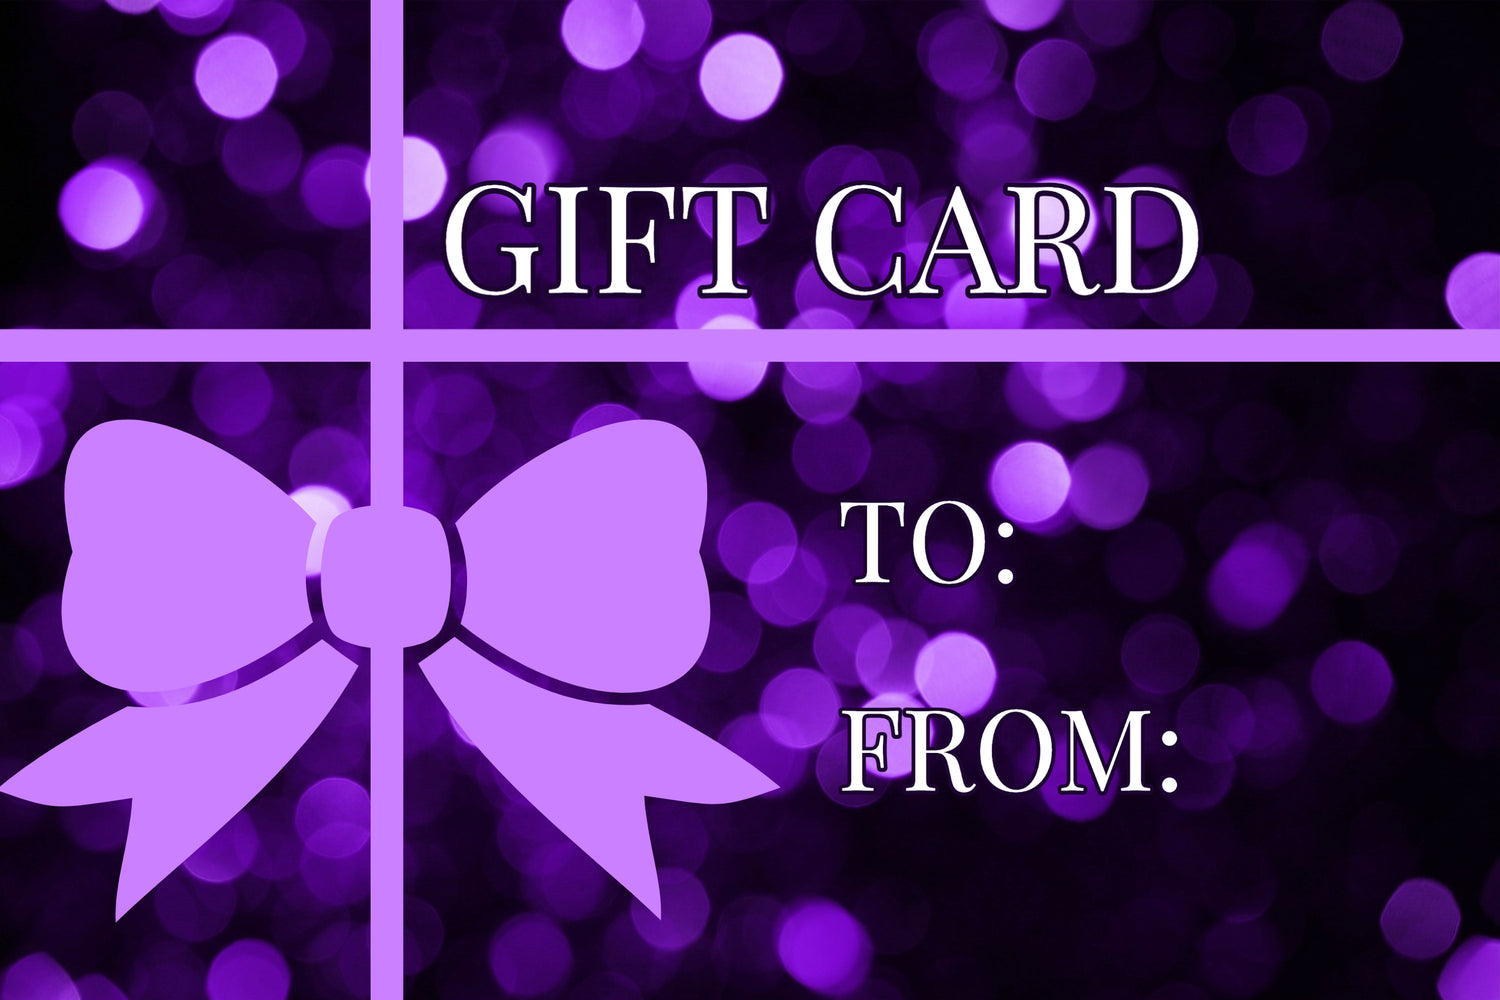 Gift Card - My love for women